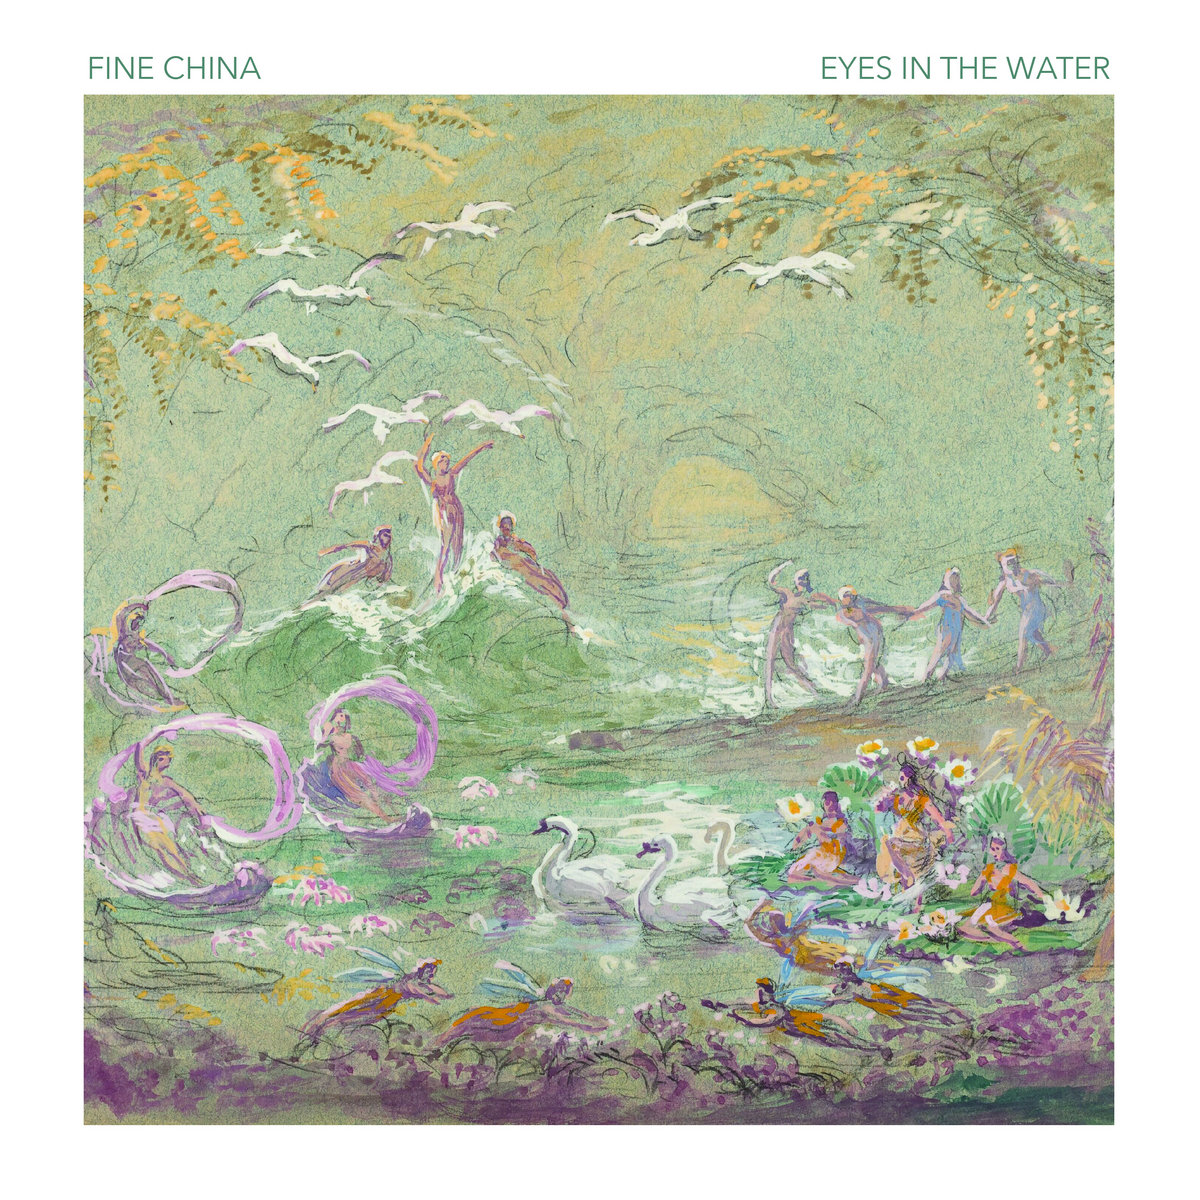 Listen Up – Fine China – Eyes in the Water EP